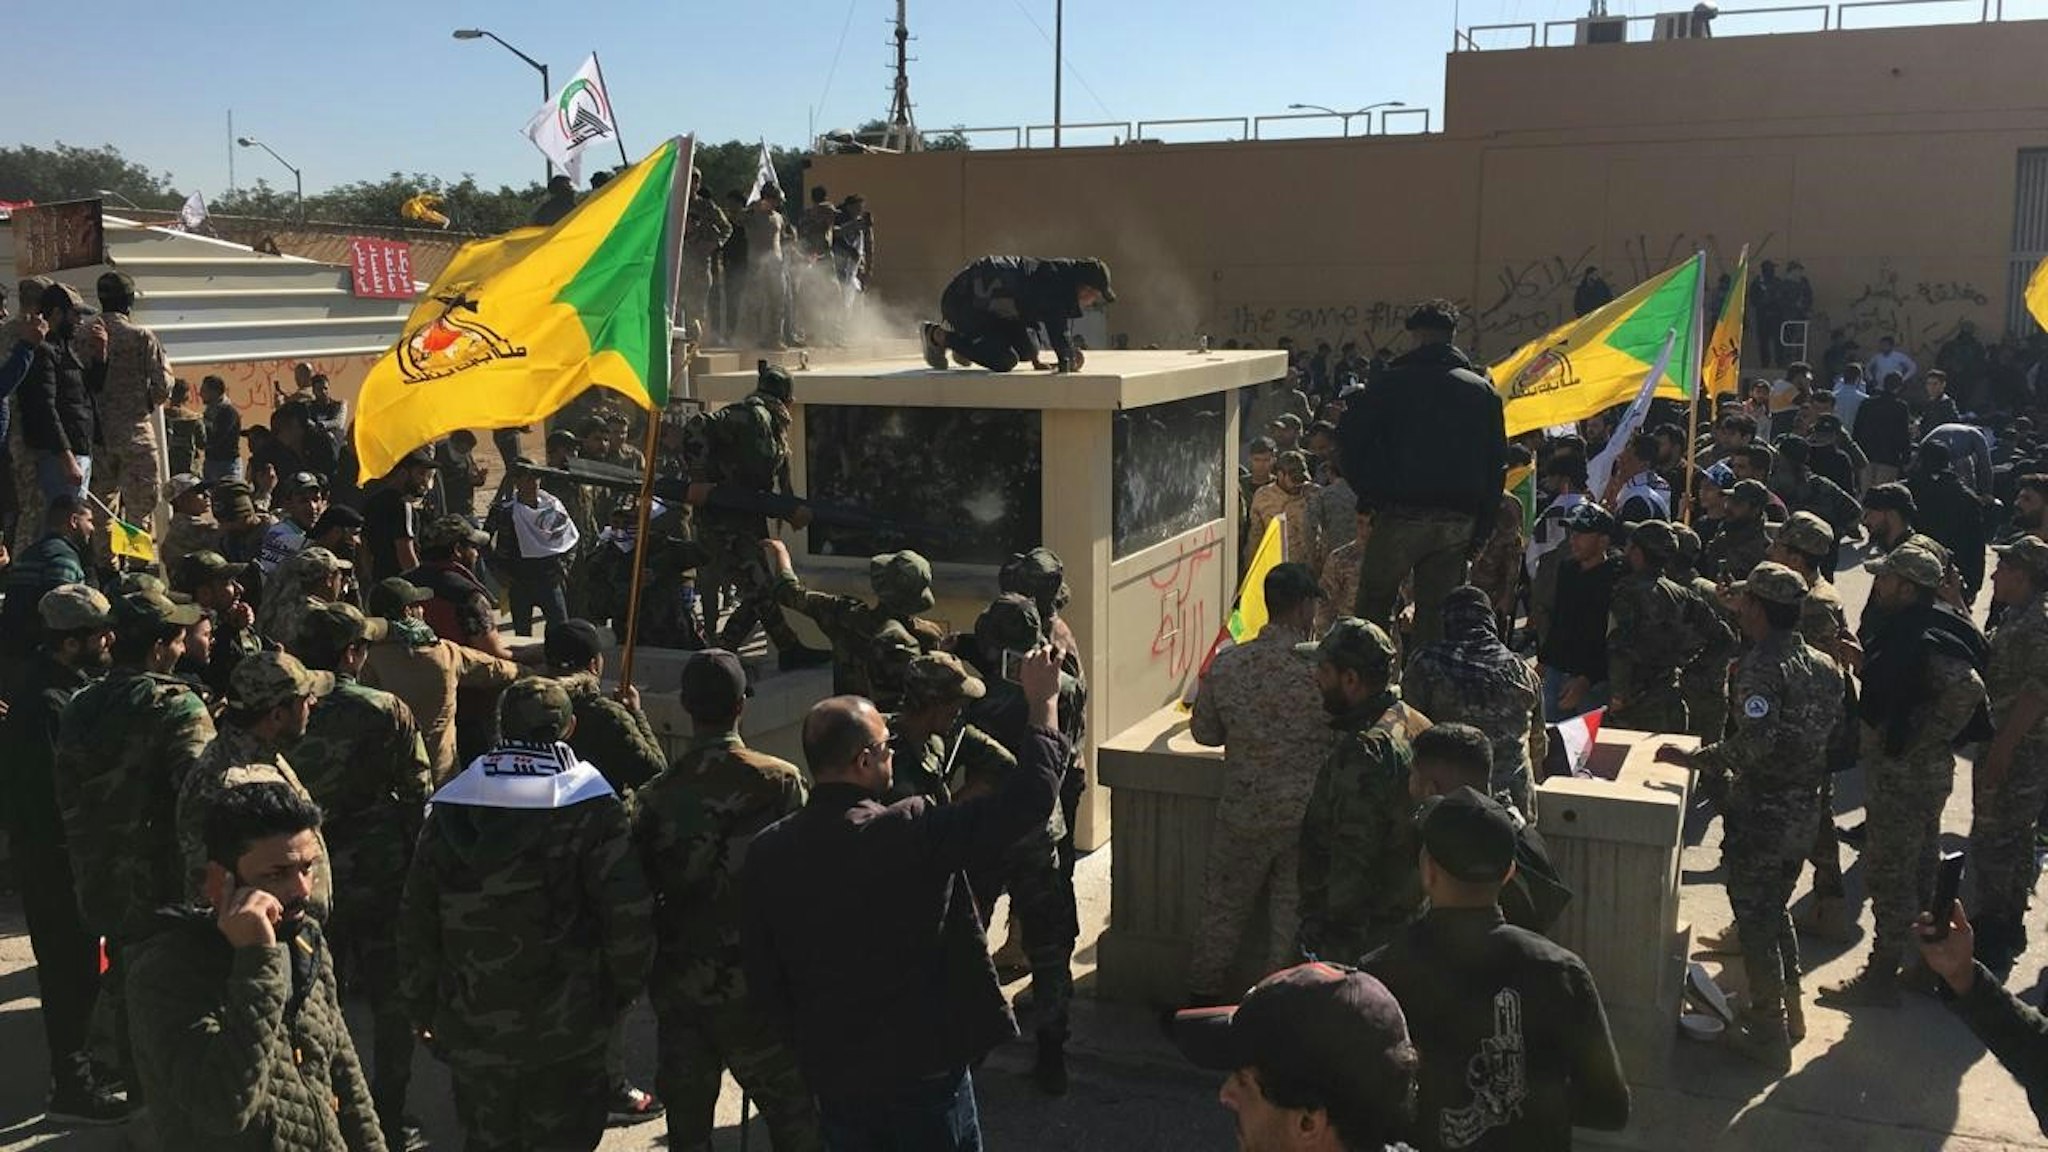 DECEMBER 31: Outraged Iraqi protesters try to storm the U.S. Embassy in Baghdad, protesting Washington's attacks on armed battalions belong to Iranian-backed Hashd al-Shaabi forces on December 31, 2019. At least 25 people were killed in weekend U.S. airstrikes on positions of Kataib Hezbollah, an Iranian-backed militia group, in Iraq and Syria. Hundreds of Iraqi protesters gathered early Tuesday near the embassy to show their anger at the U.S. move.